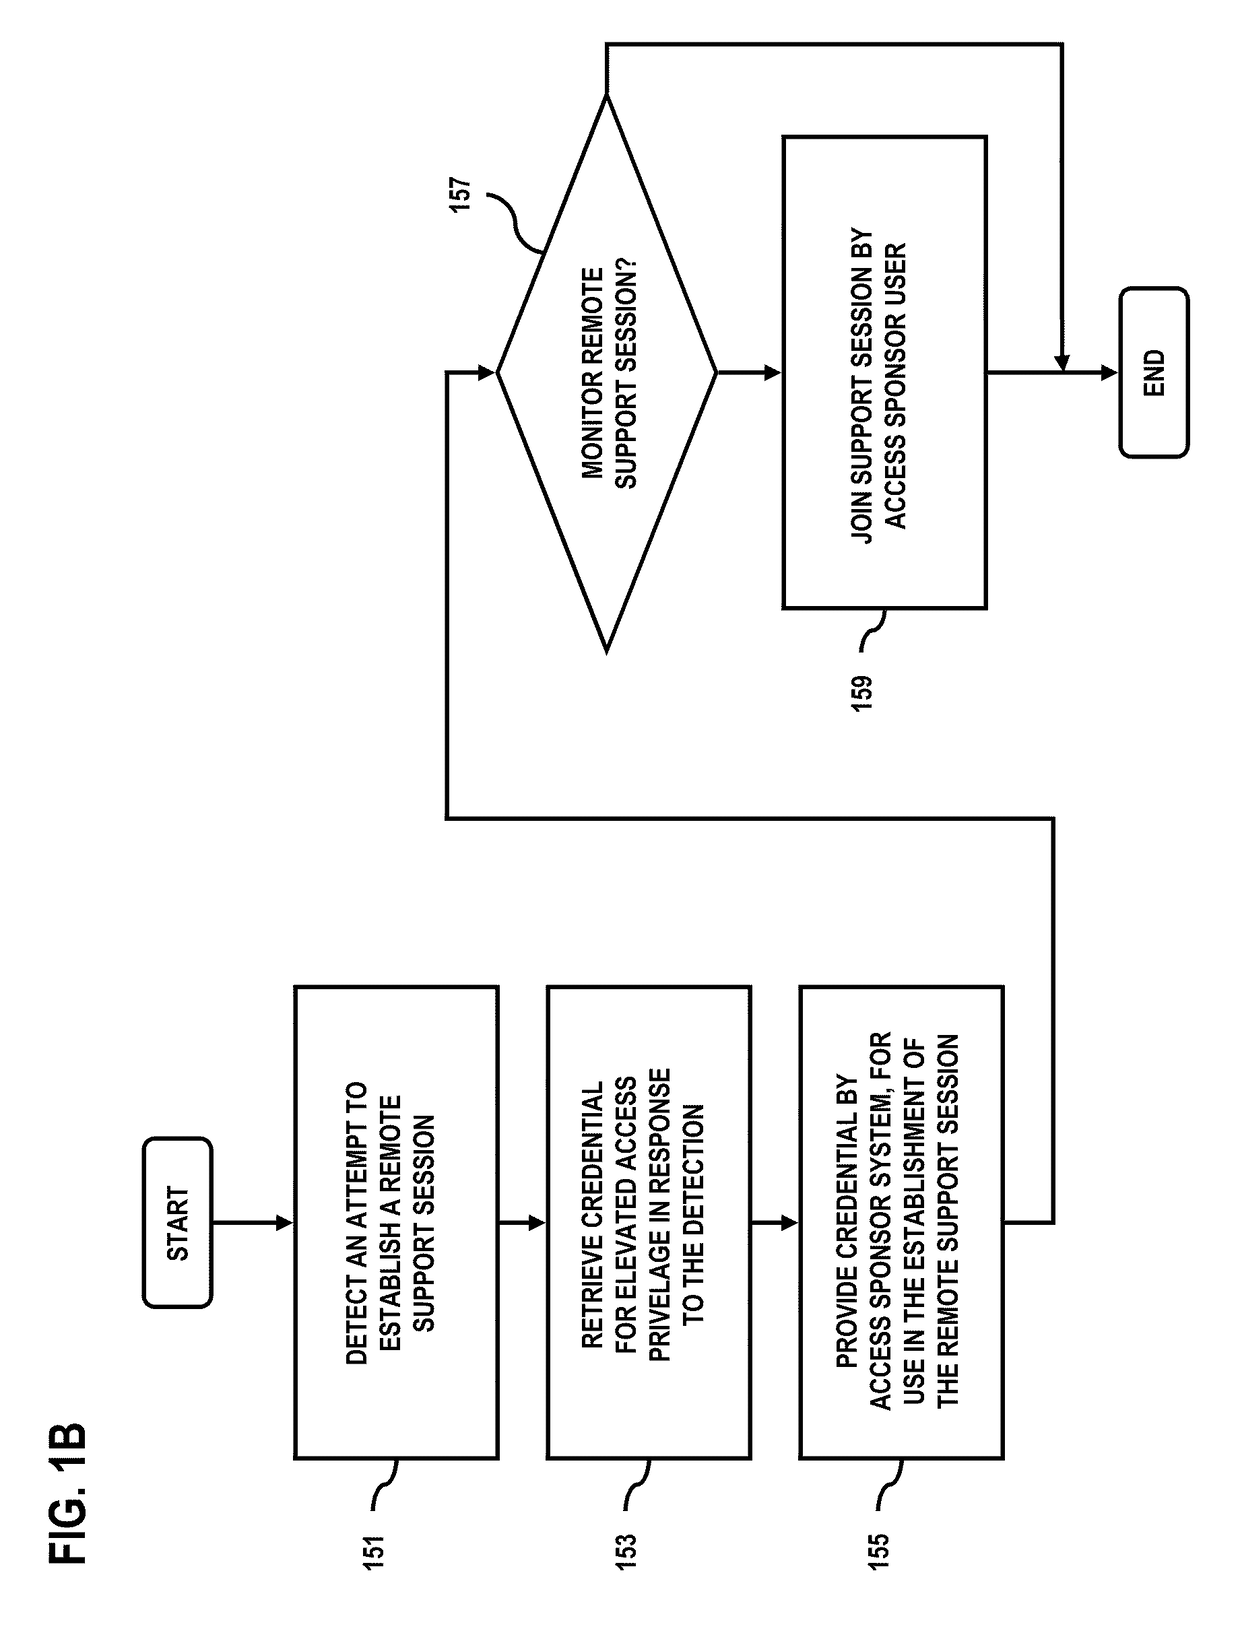 Method and apparatus for securely providing access and elevated rights for remote support